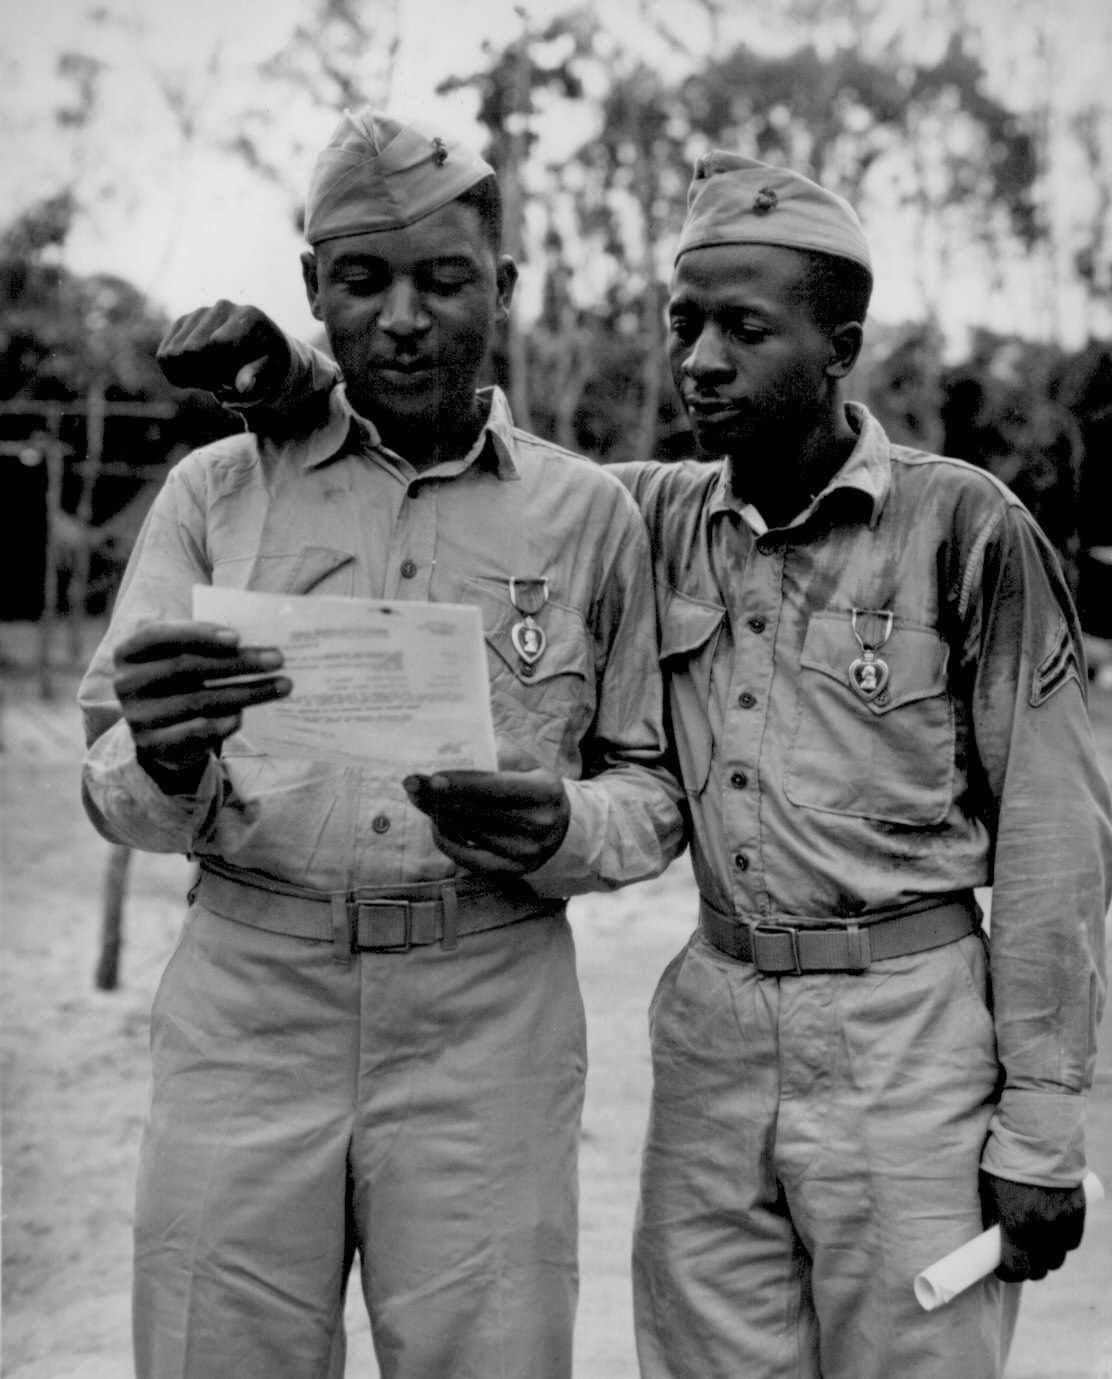 List 92+ Images the participation of the montford point marines in the amphibious assault at saipan represented Superb